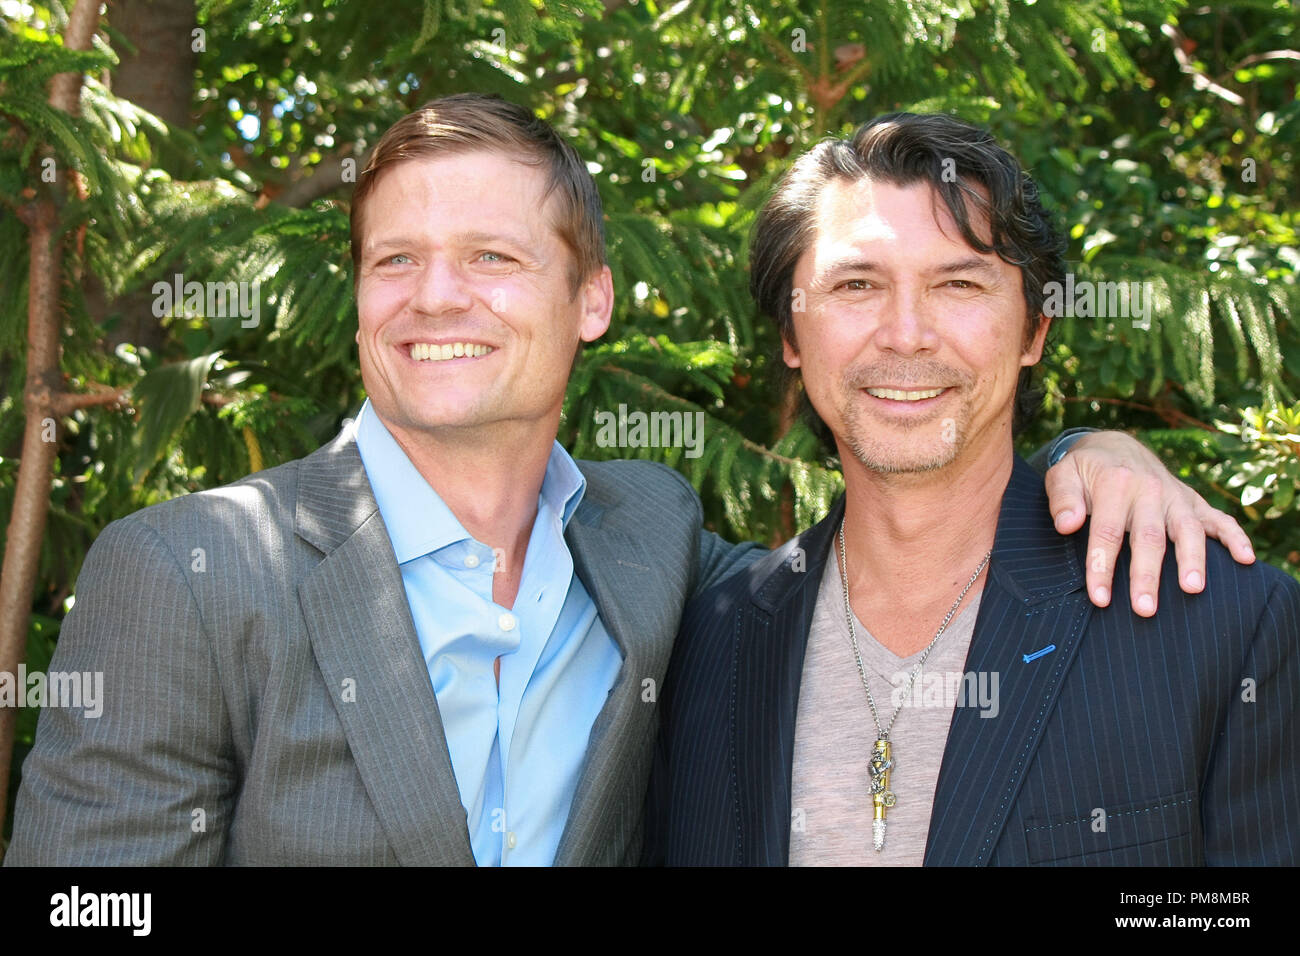 Bailey Chase and Lou Diamond Phillips 'Longmire' TV  Portrait Session, August 27, 2012.  Reproduction by American tabloids is absolutely forbidden. File Reference # 31636 020JRC  For Editorial Use Only -  All Rights Reserved Stock Photo